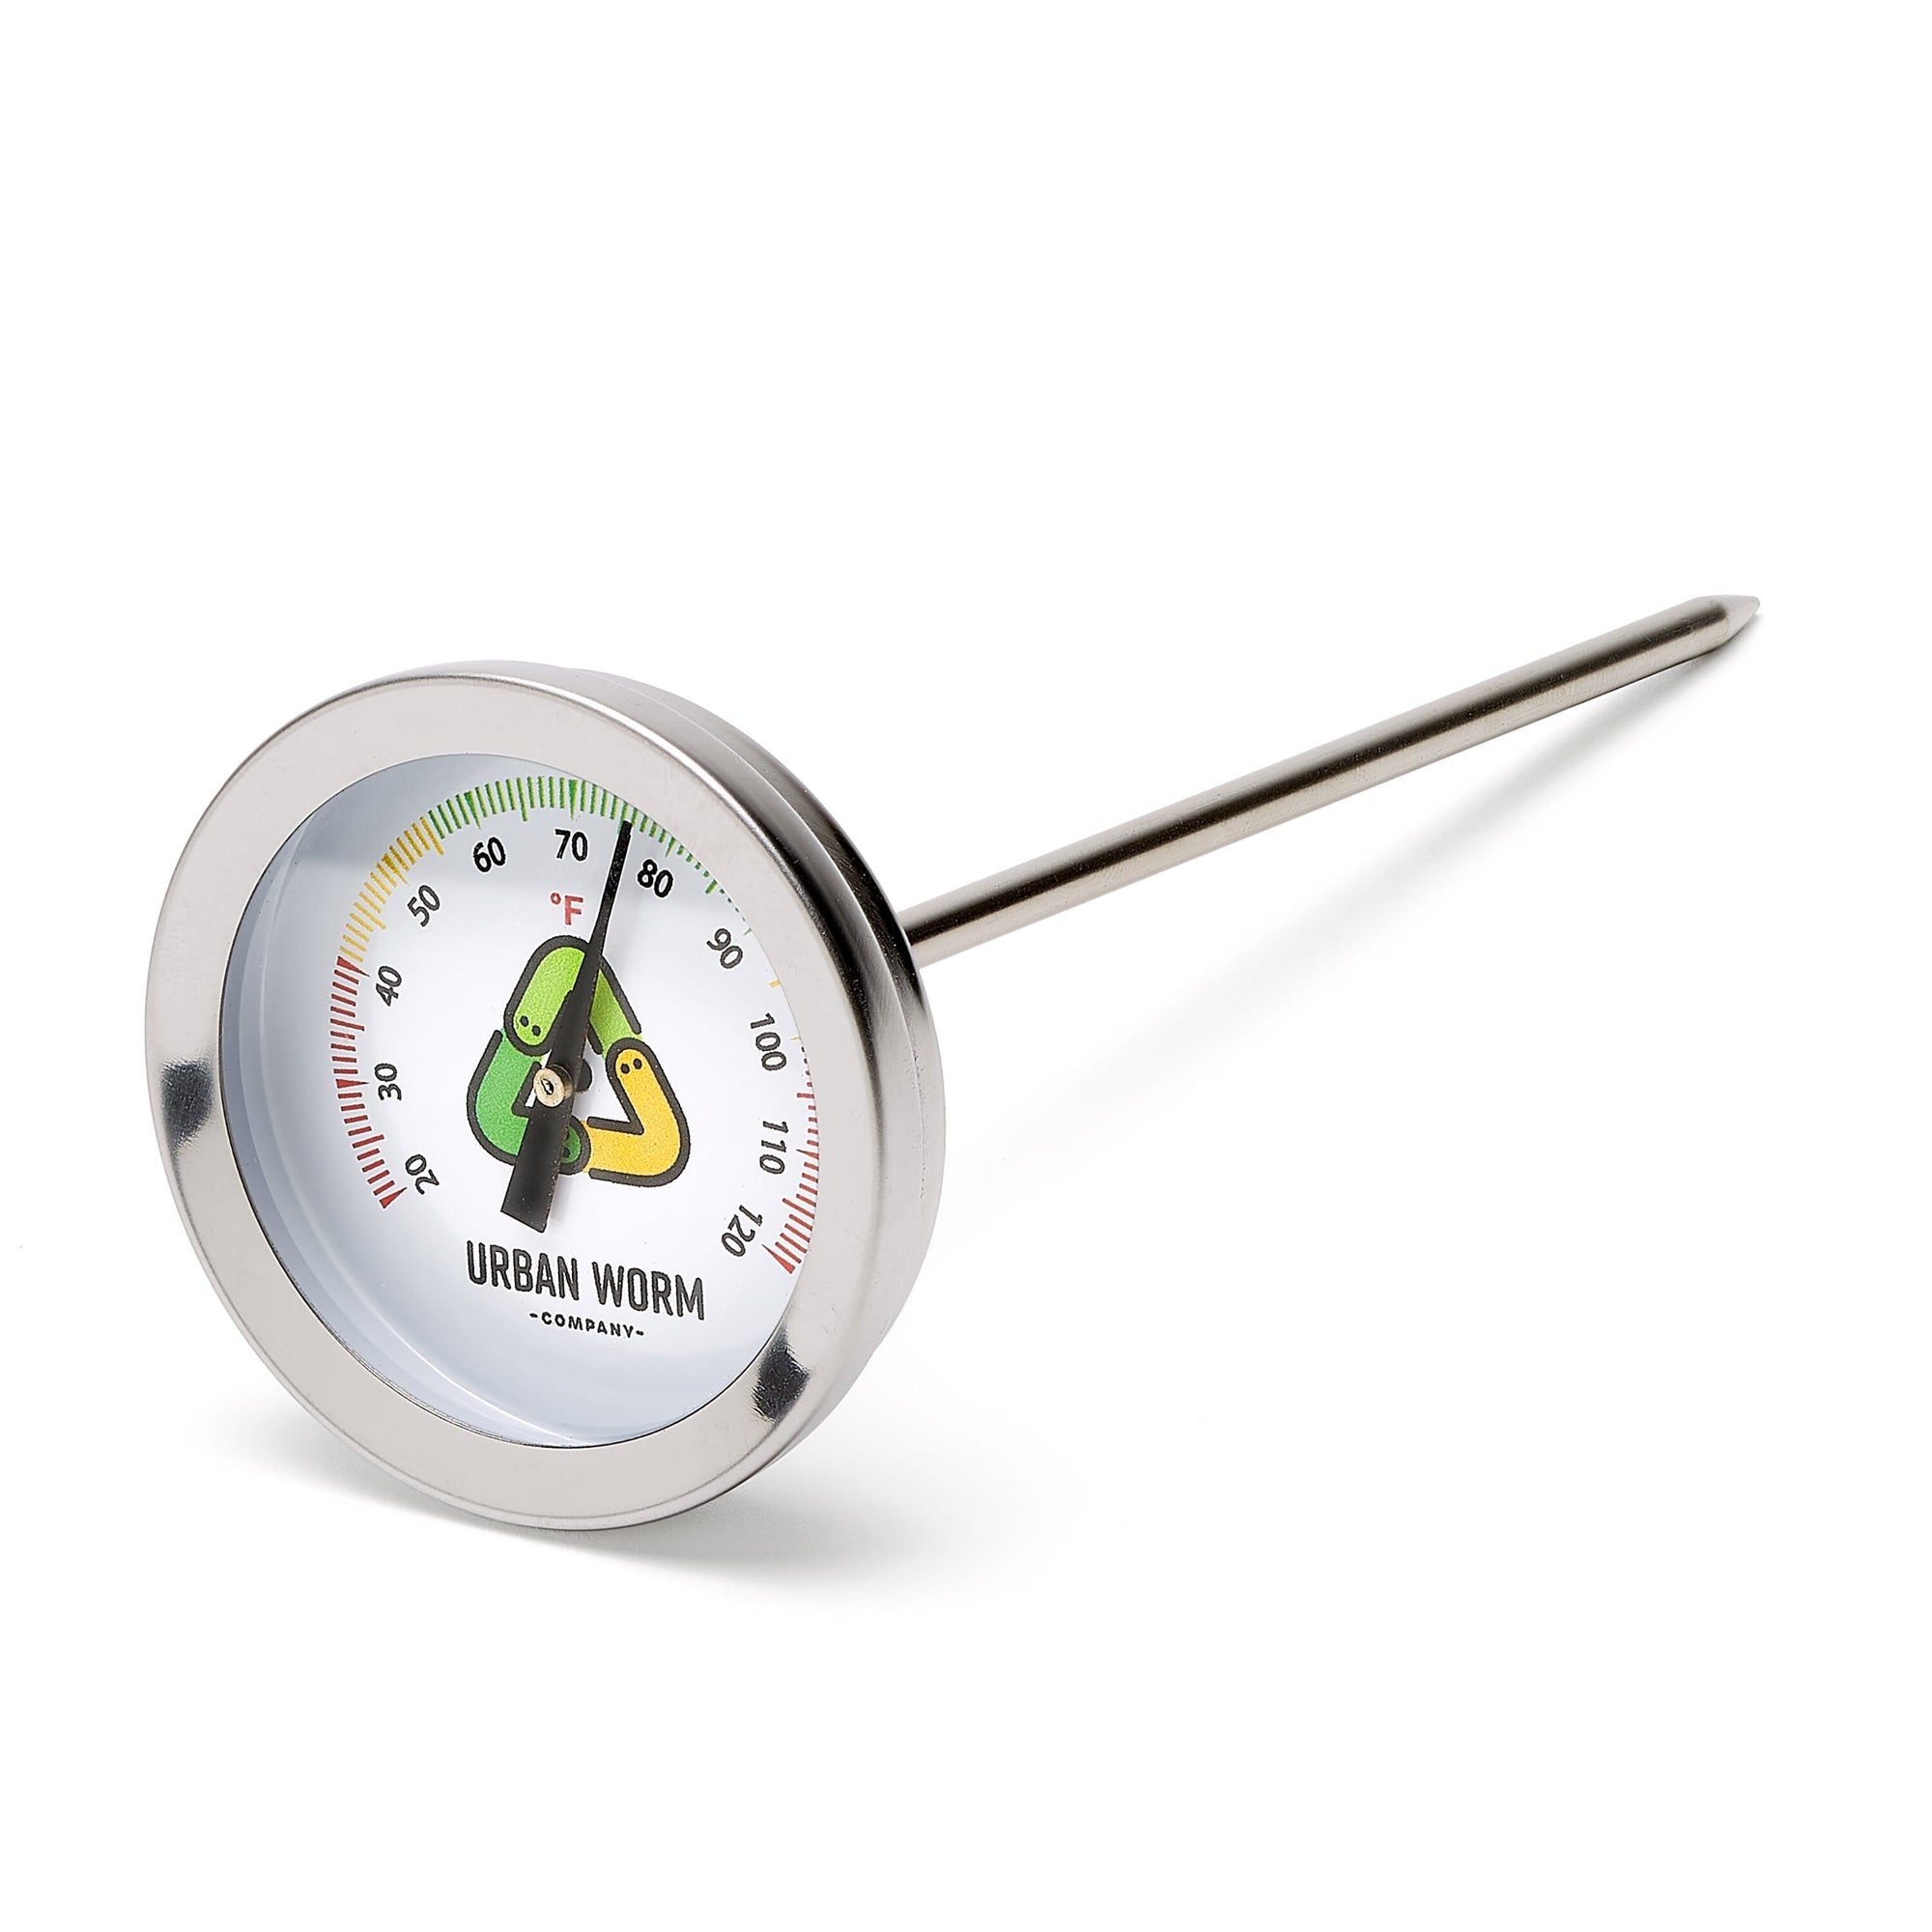 Urban Worm Thermometer 5-Pack Urban Worm Company 